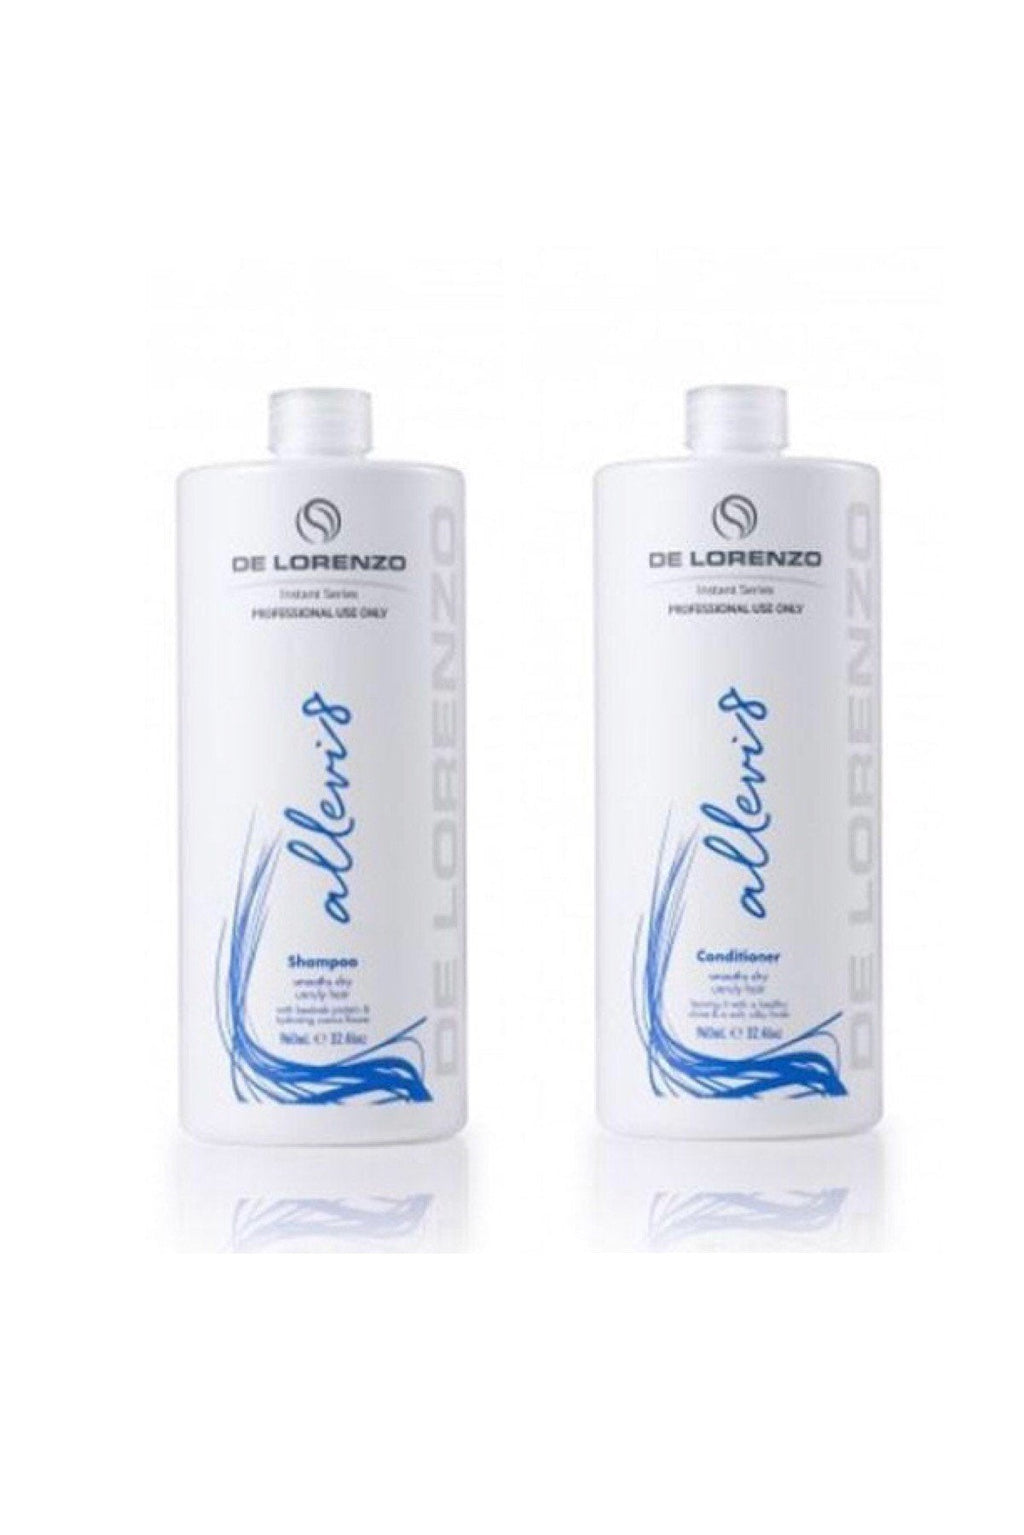 De Lorenzo Instant Allevi8 Shampoo and Conditioner Duo 960ml (With Pumps)